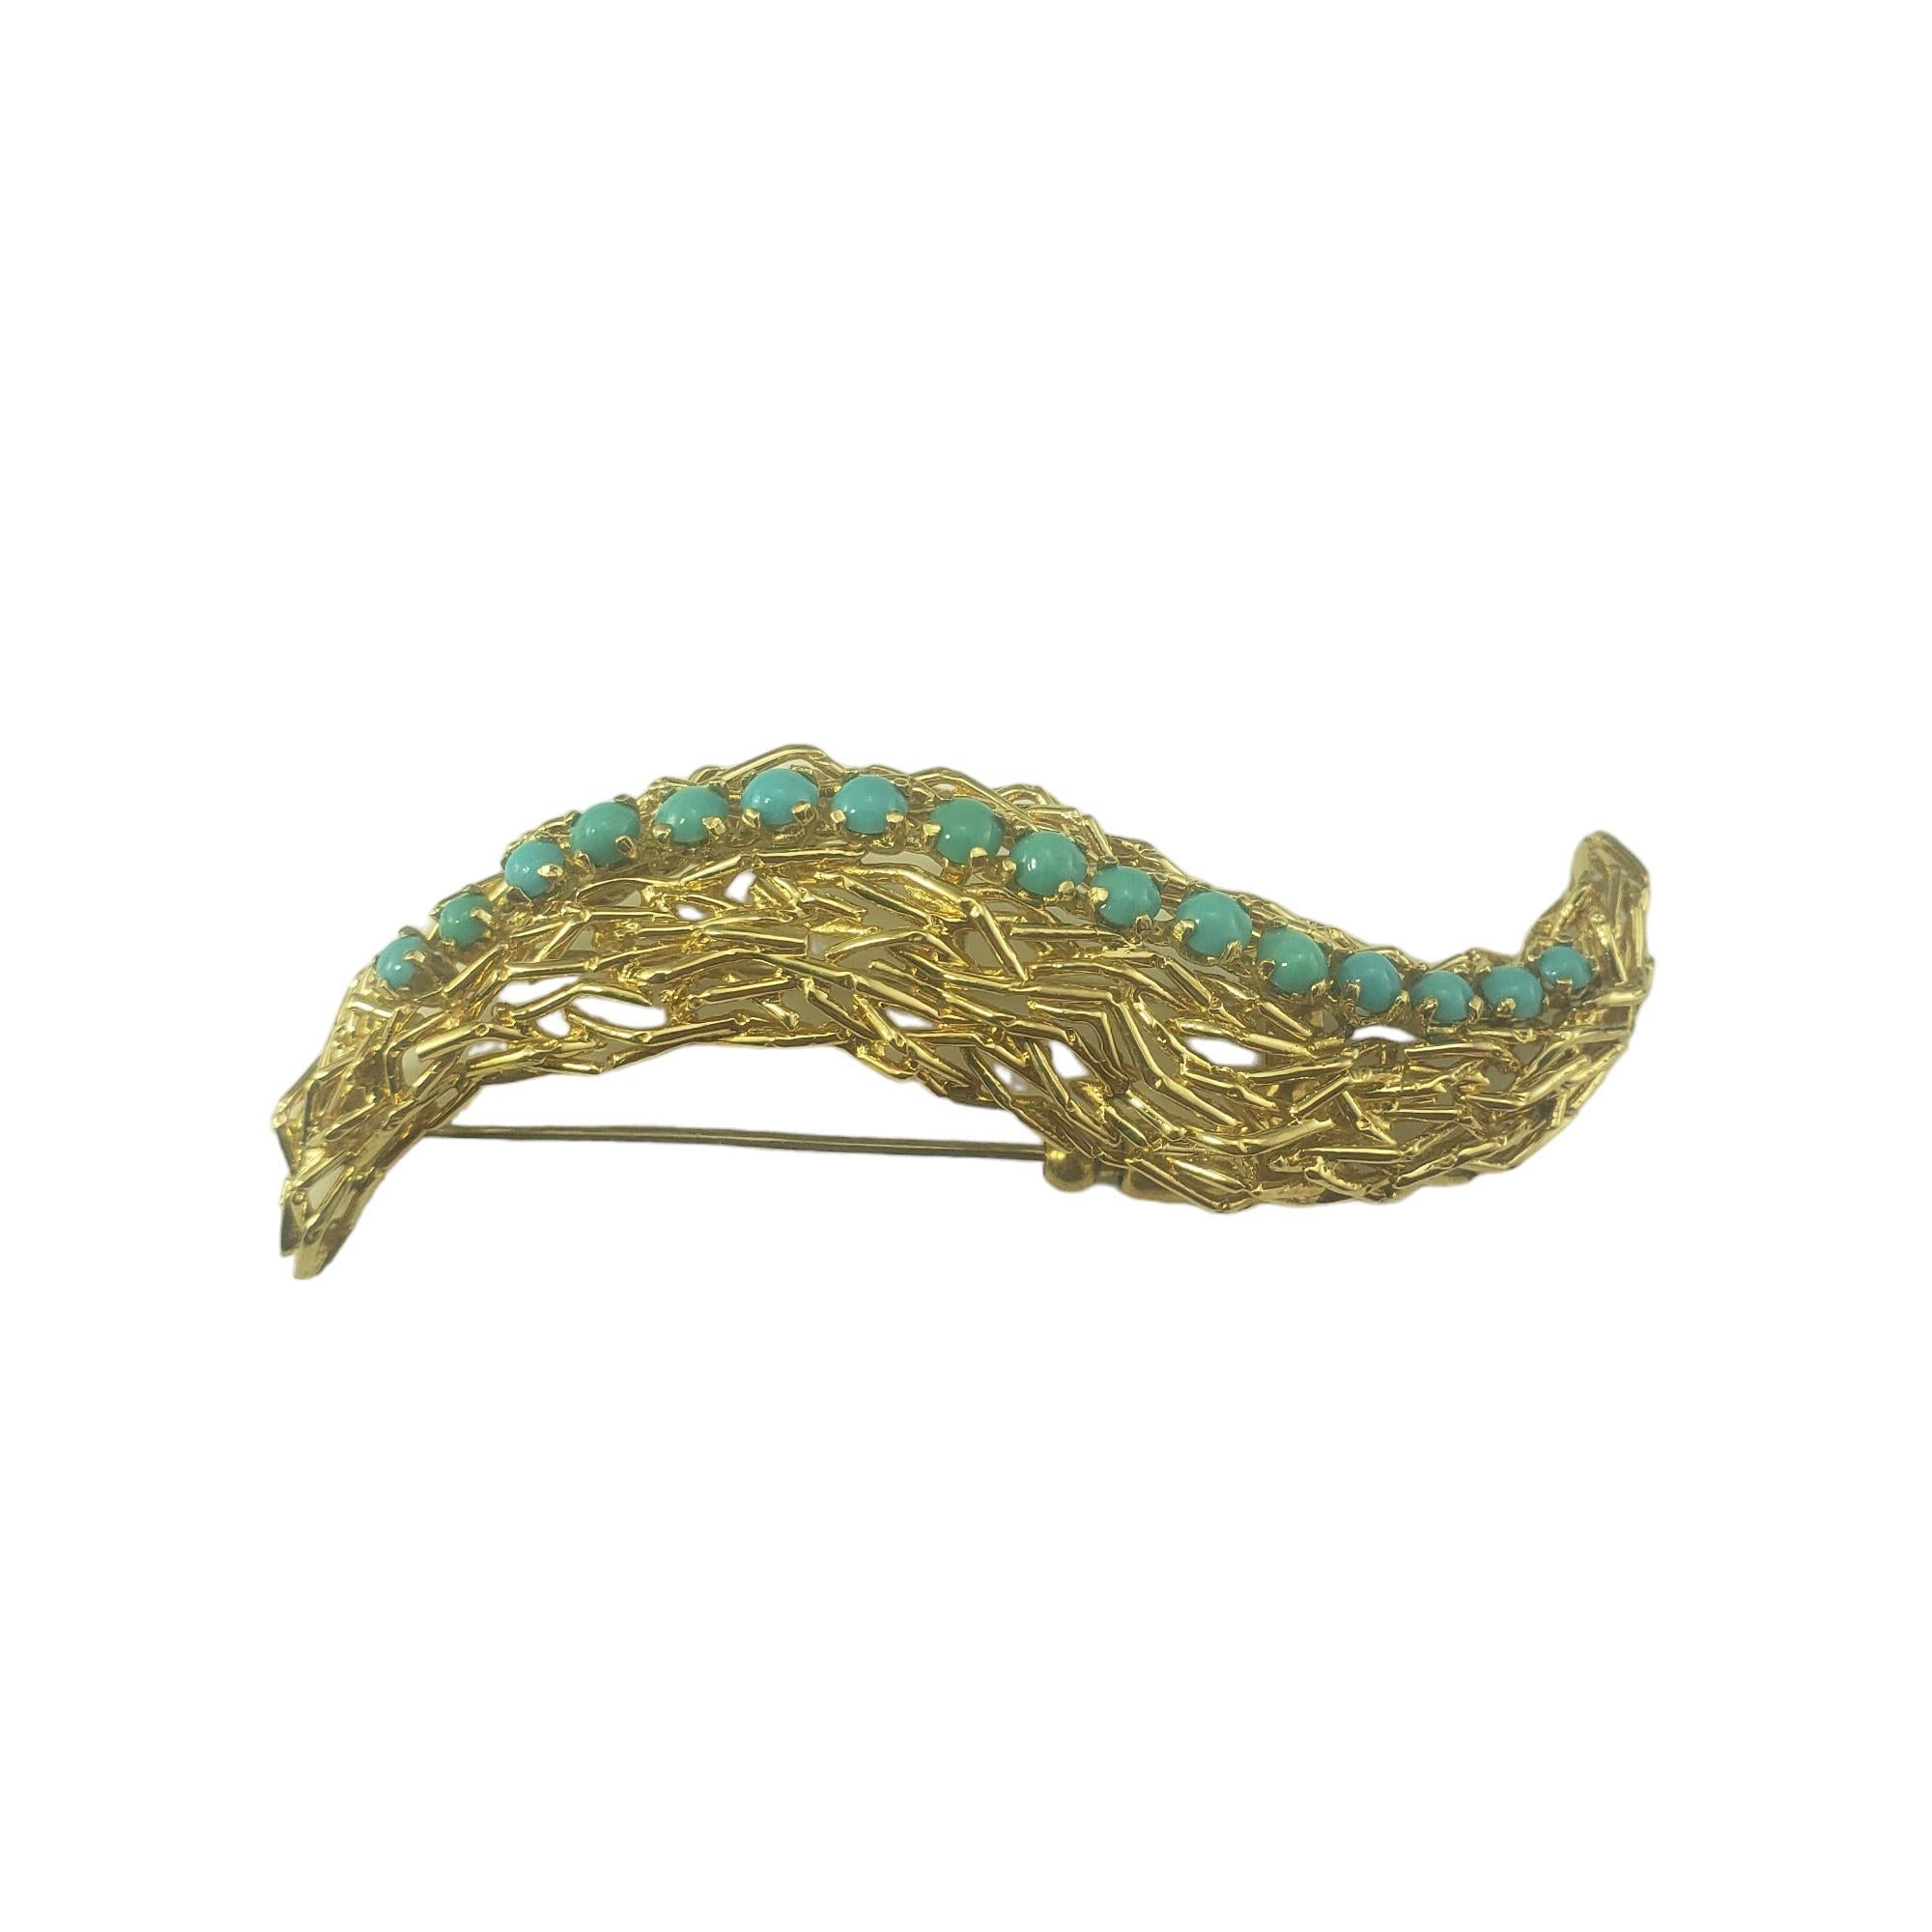 Bead Tiffany & Co. 18 Karat Yellow Gold and Turquoise Brooch/Pin #16802 For Sale